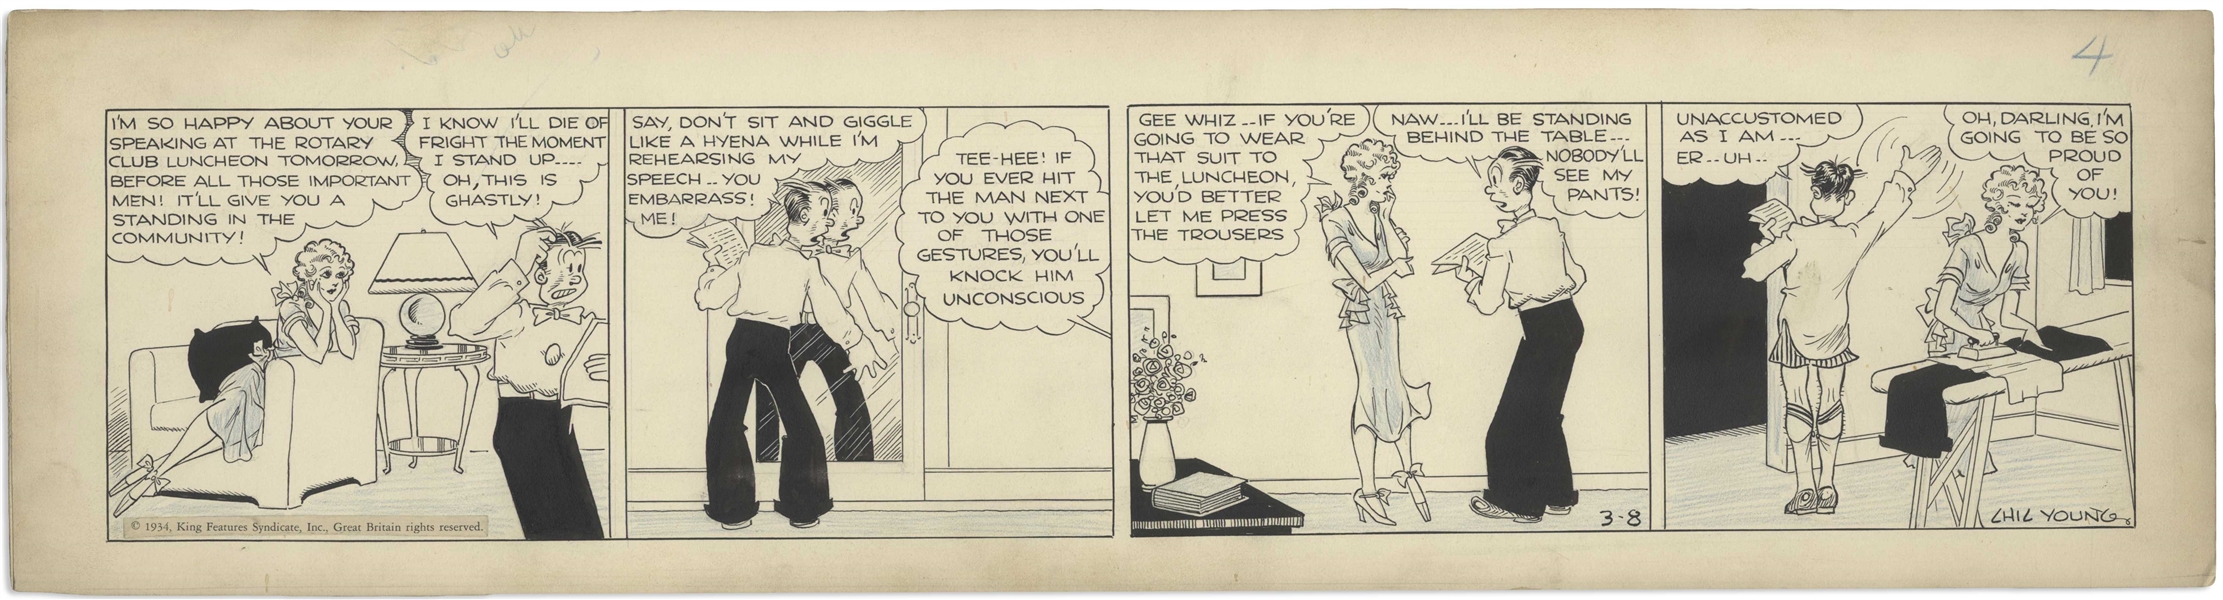 Chic Young Hand-Drawn ''Blondie'' Comic Strip From 1933 Titled ''Figures of Speech'' -- Dagwood Prepares for an Important Speech